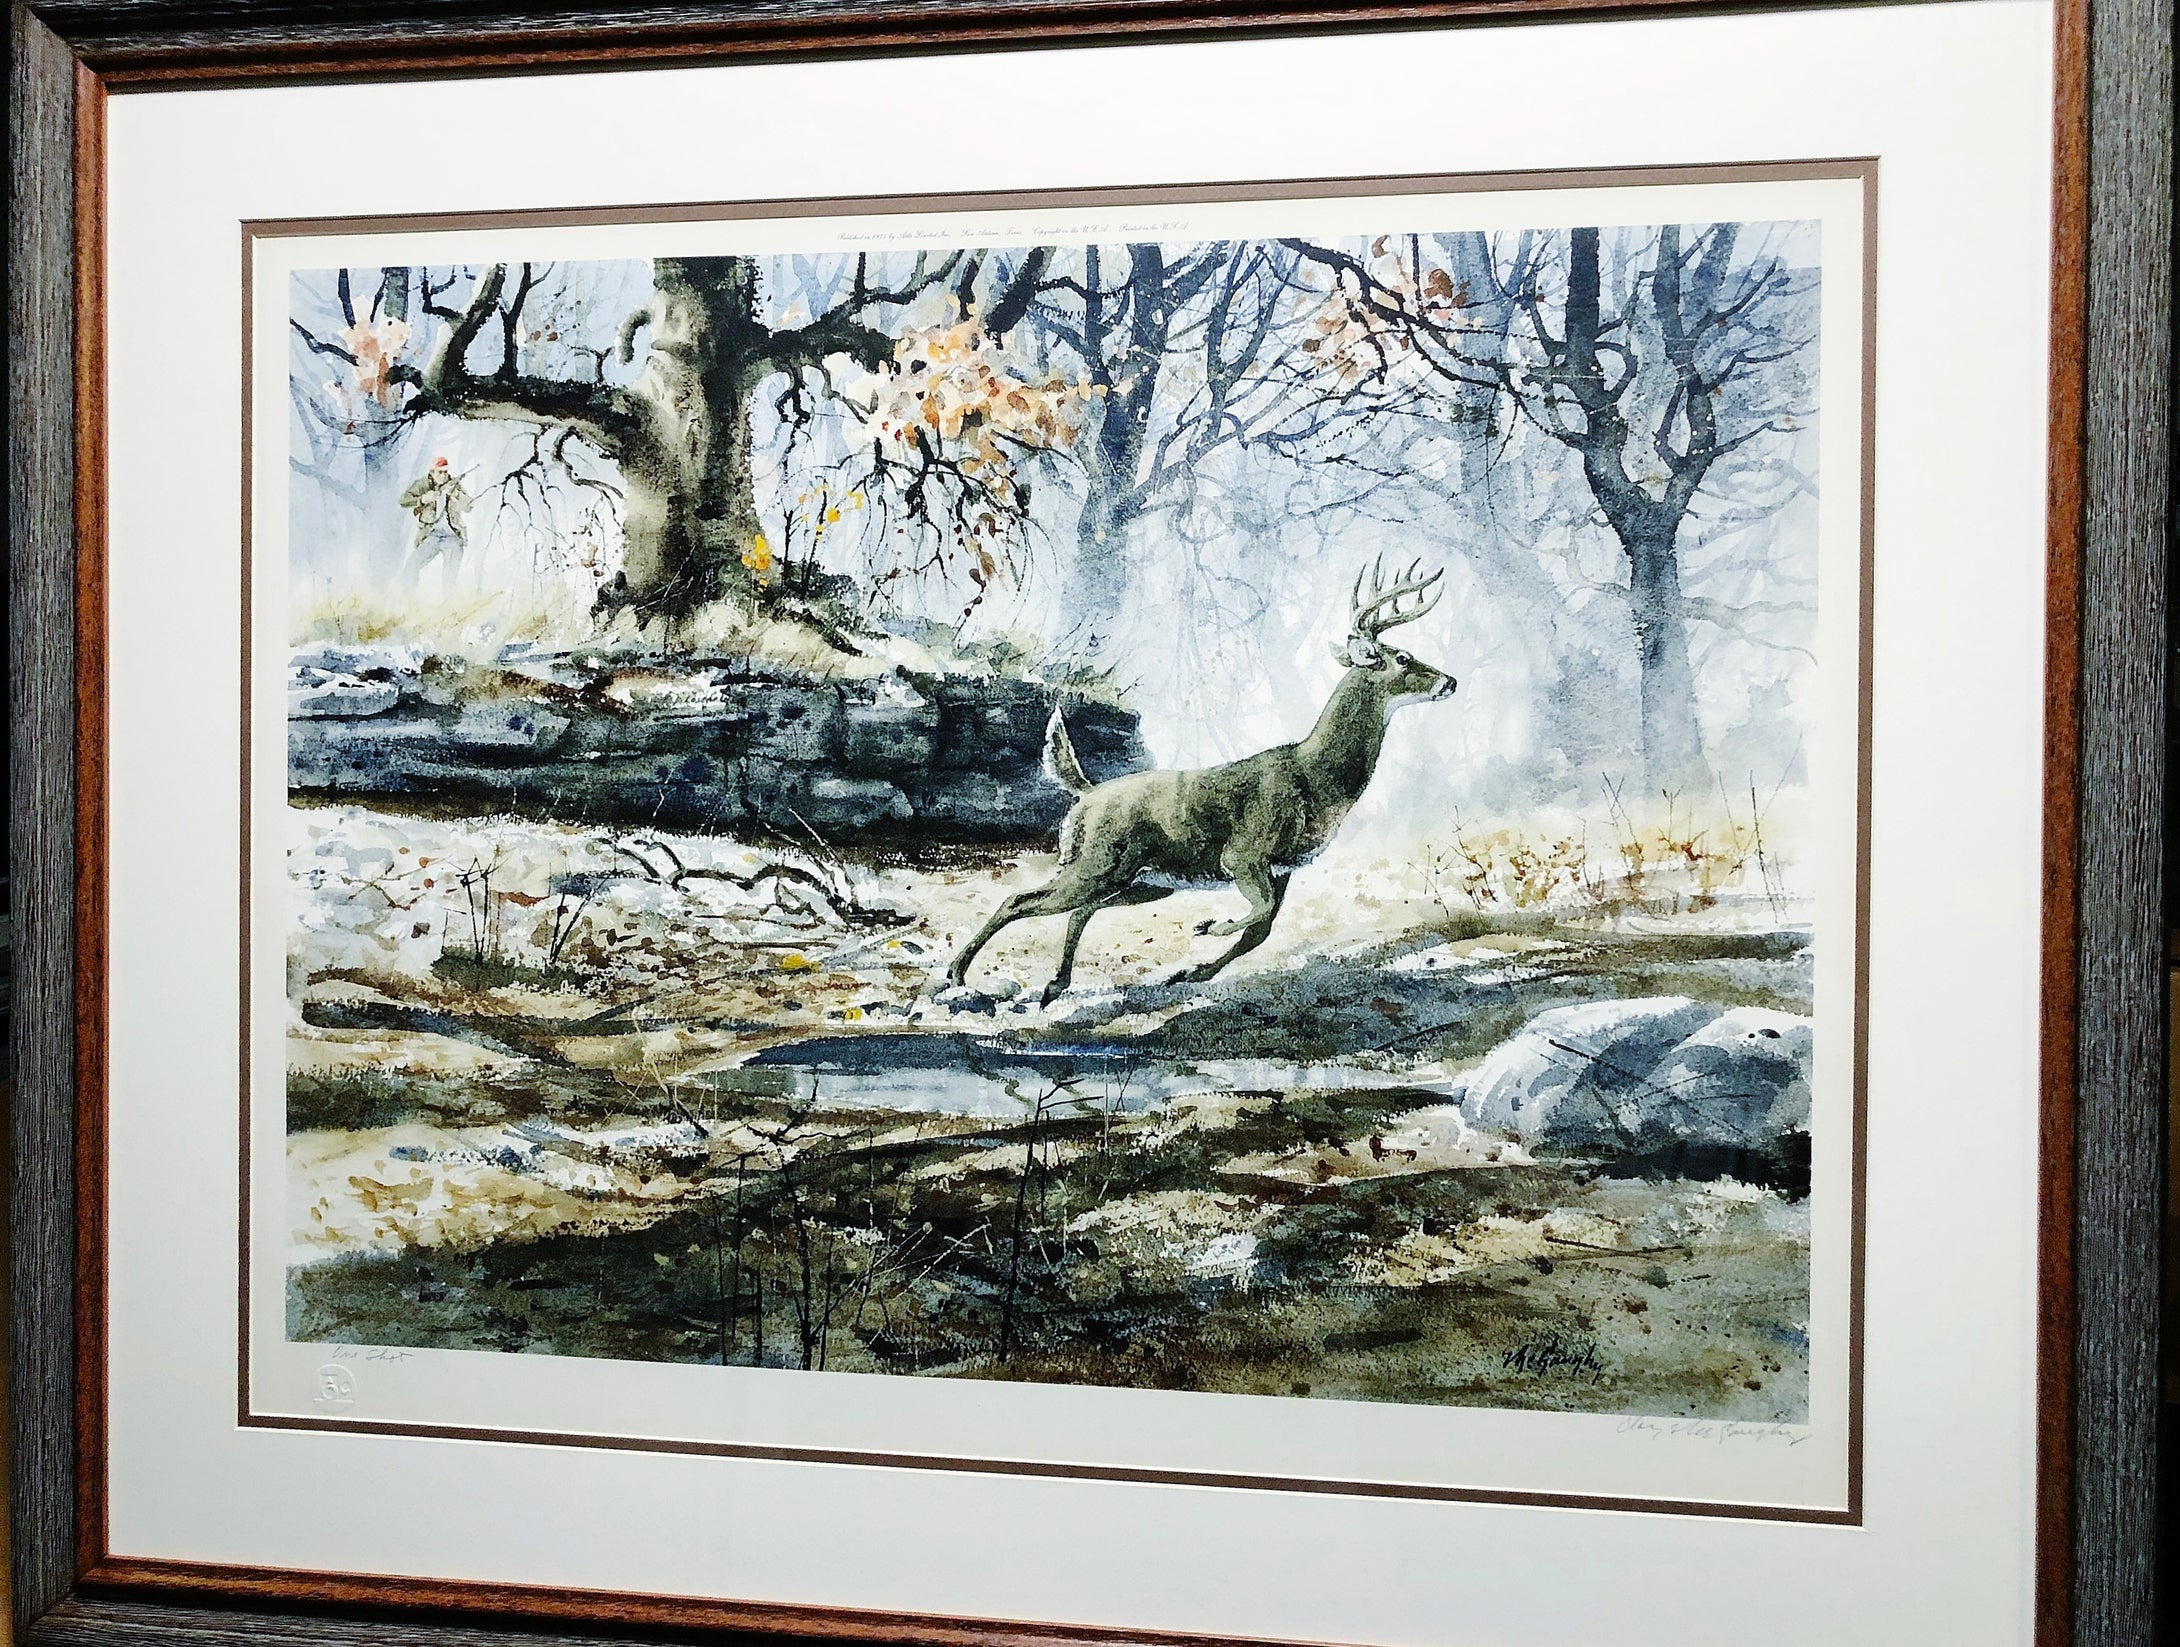 Clay McGaughy - One Shot - Lithograph - Whitetail Deer Hunt - Brand New Custom Sporting Frame